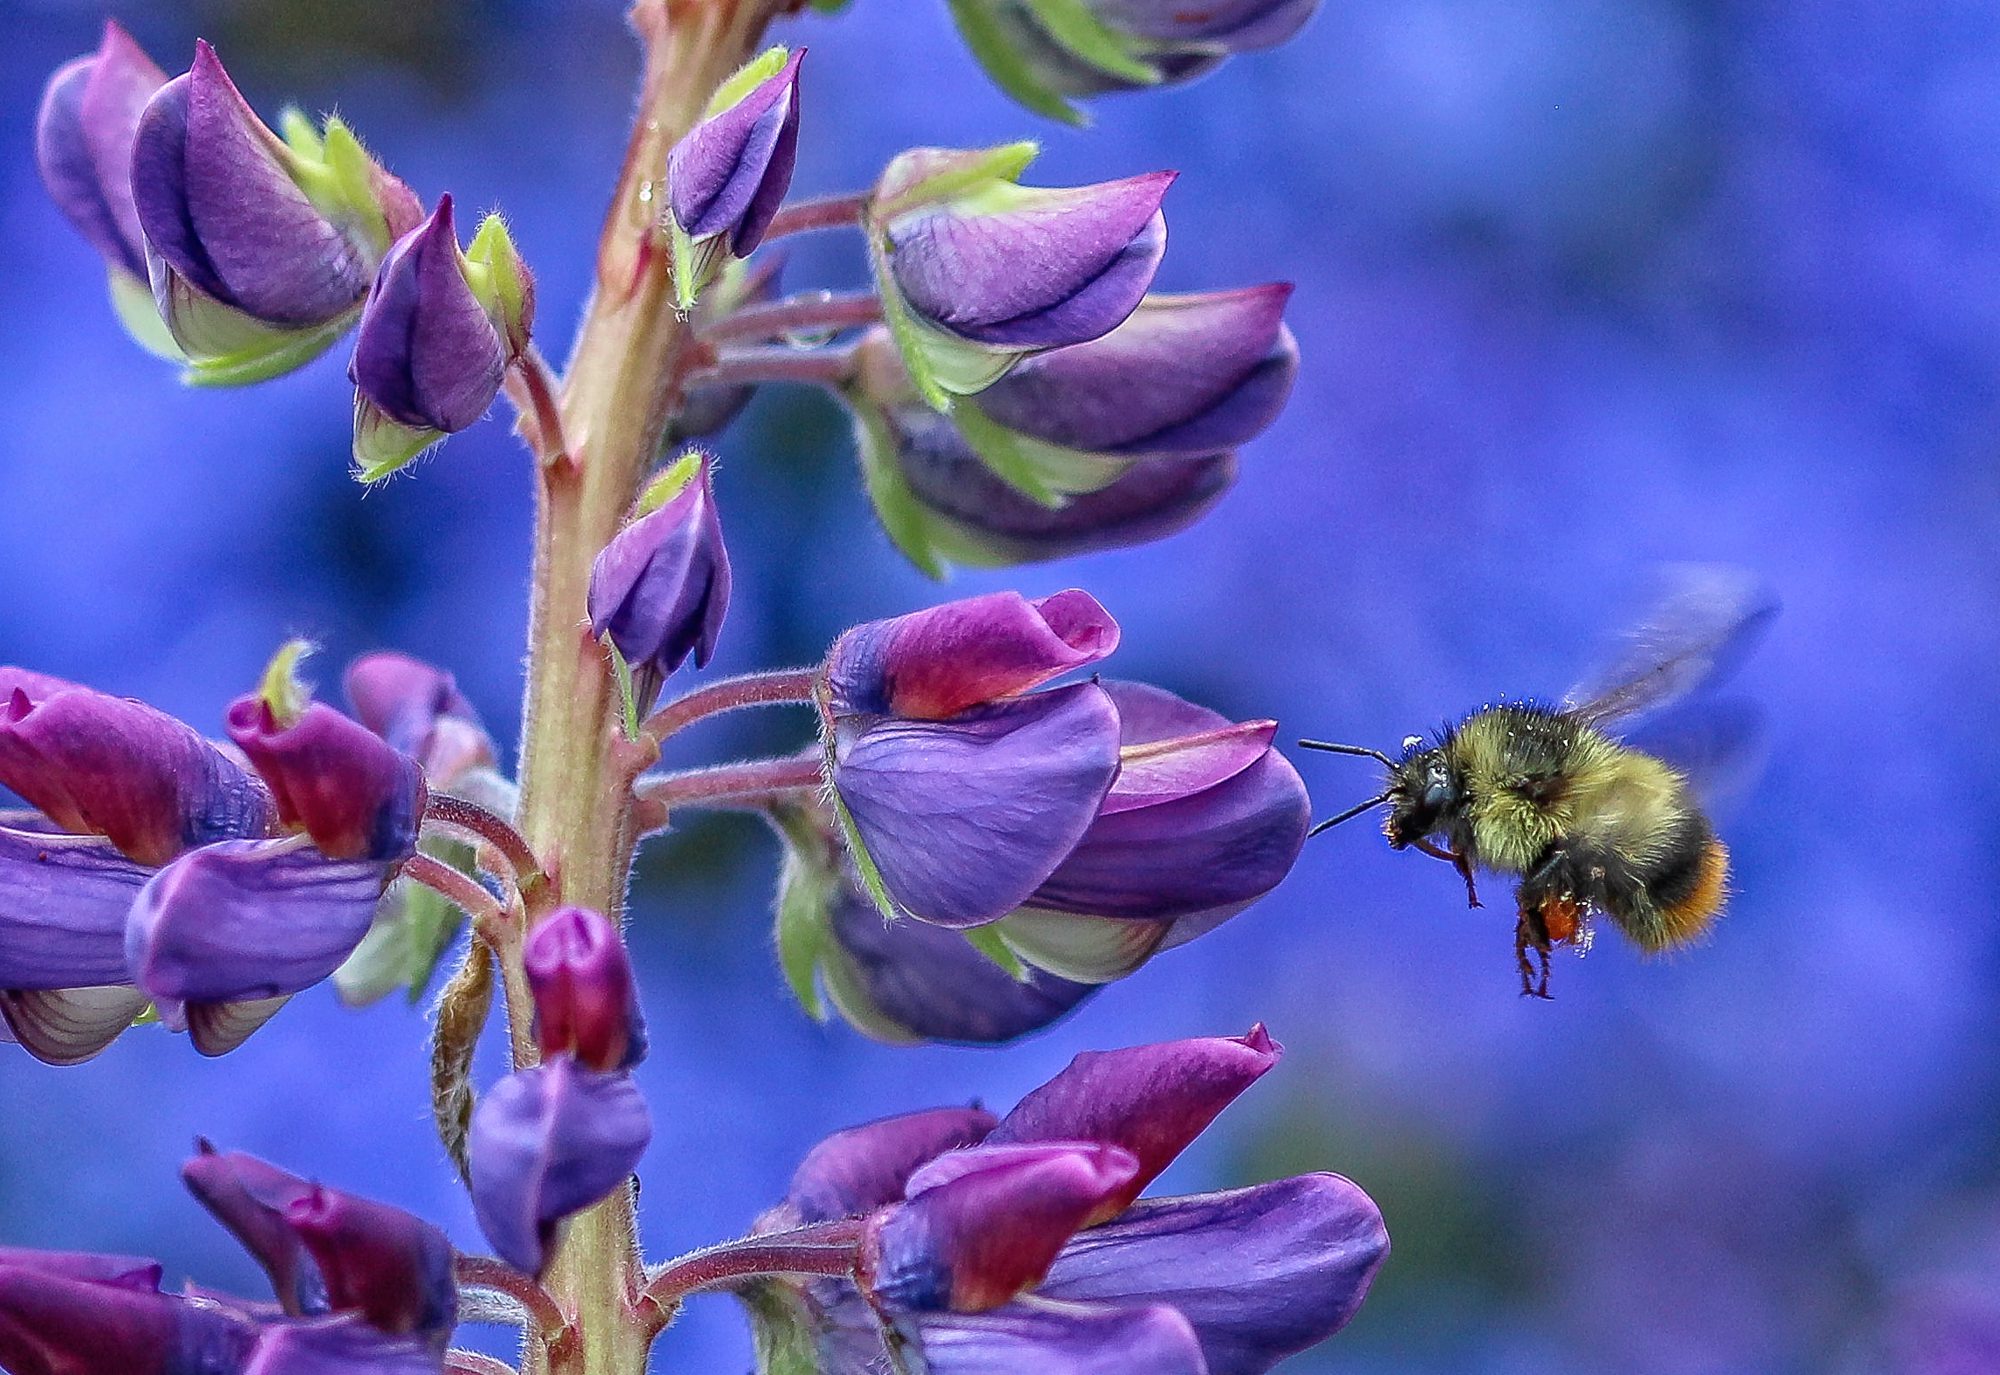 Bee hovering next to a flower